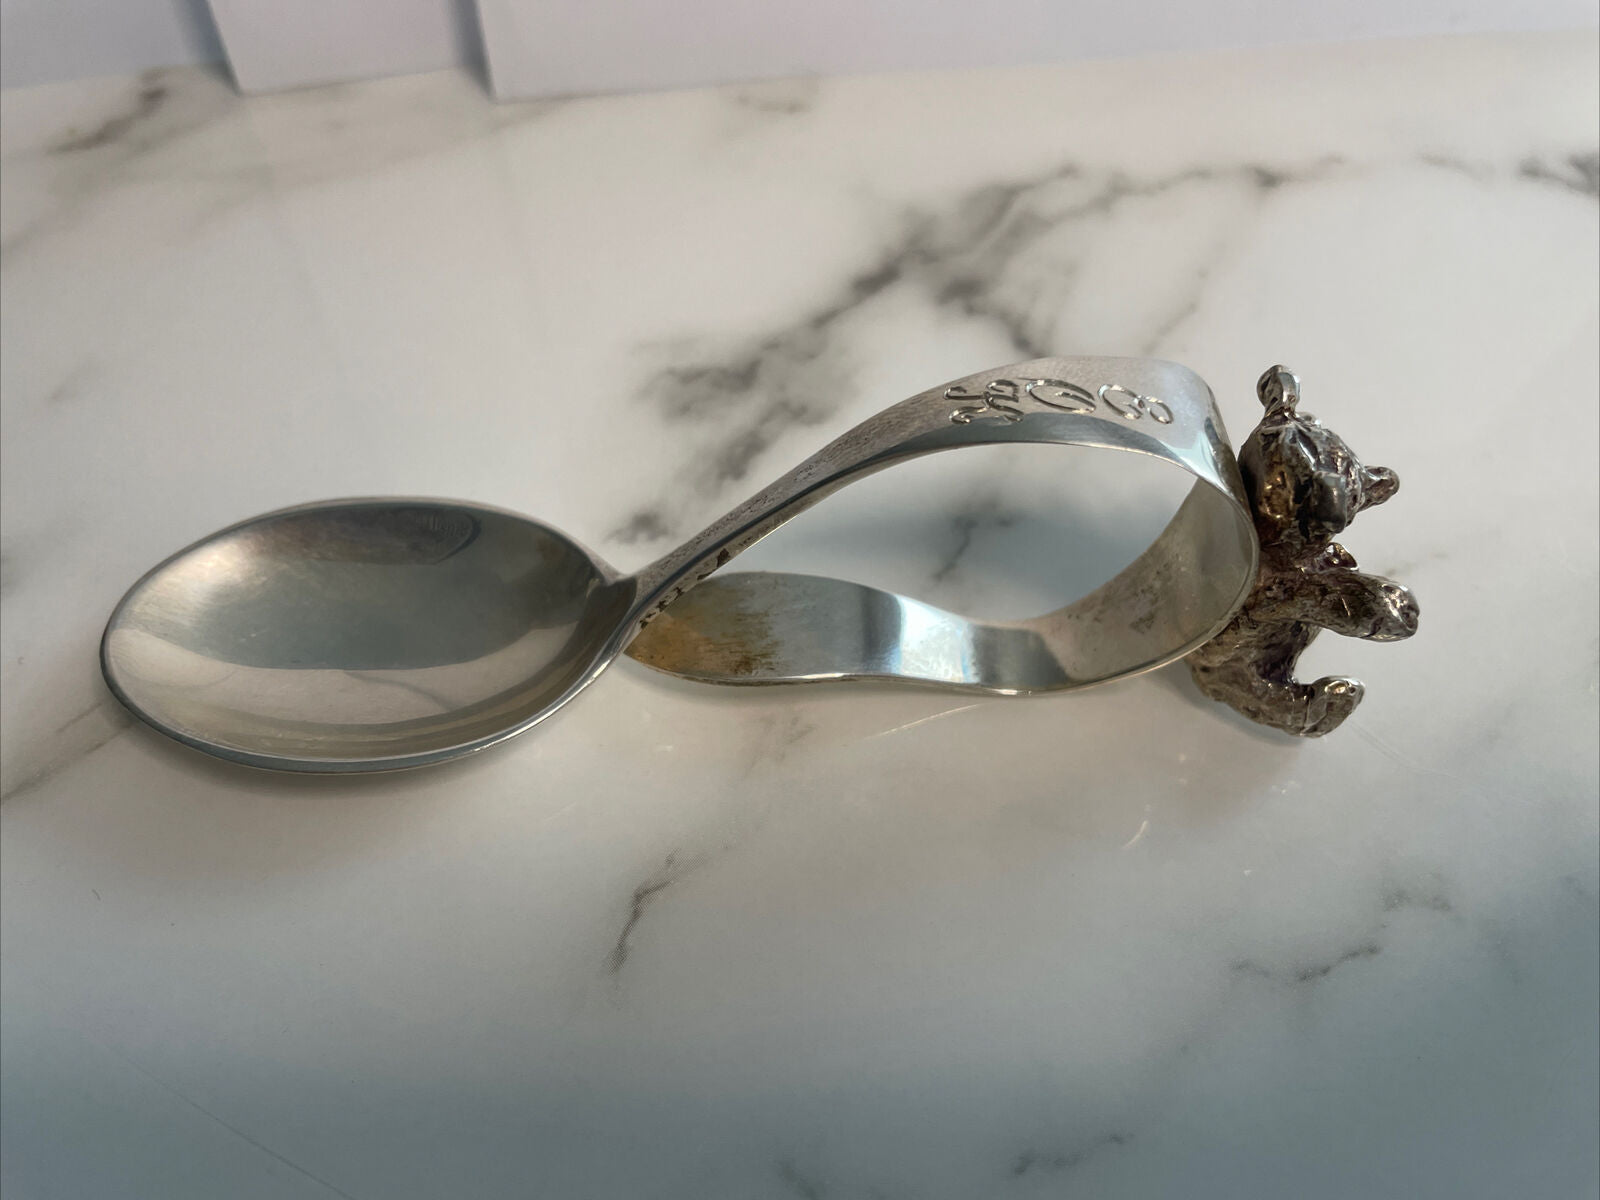 Sterling Silver ONC Figural Teddy Bear child baby feeding spoon Hand Wrought